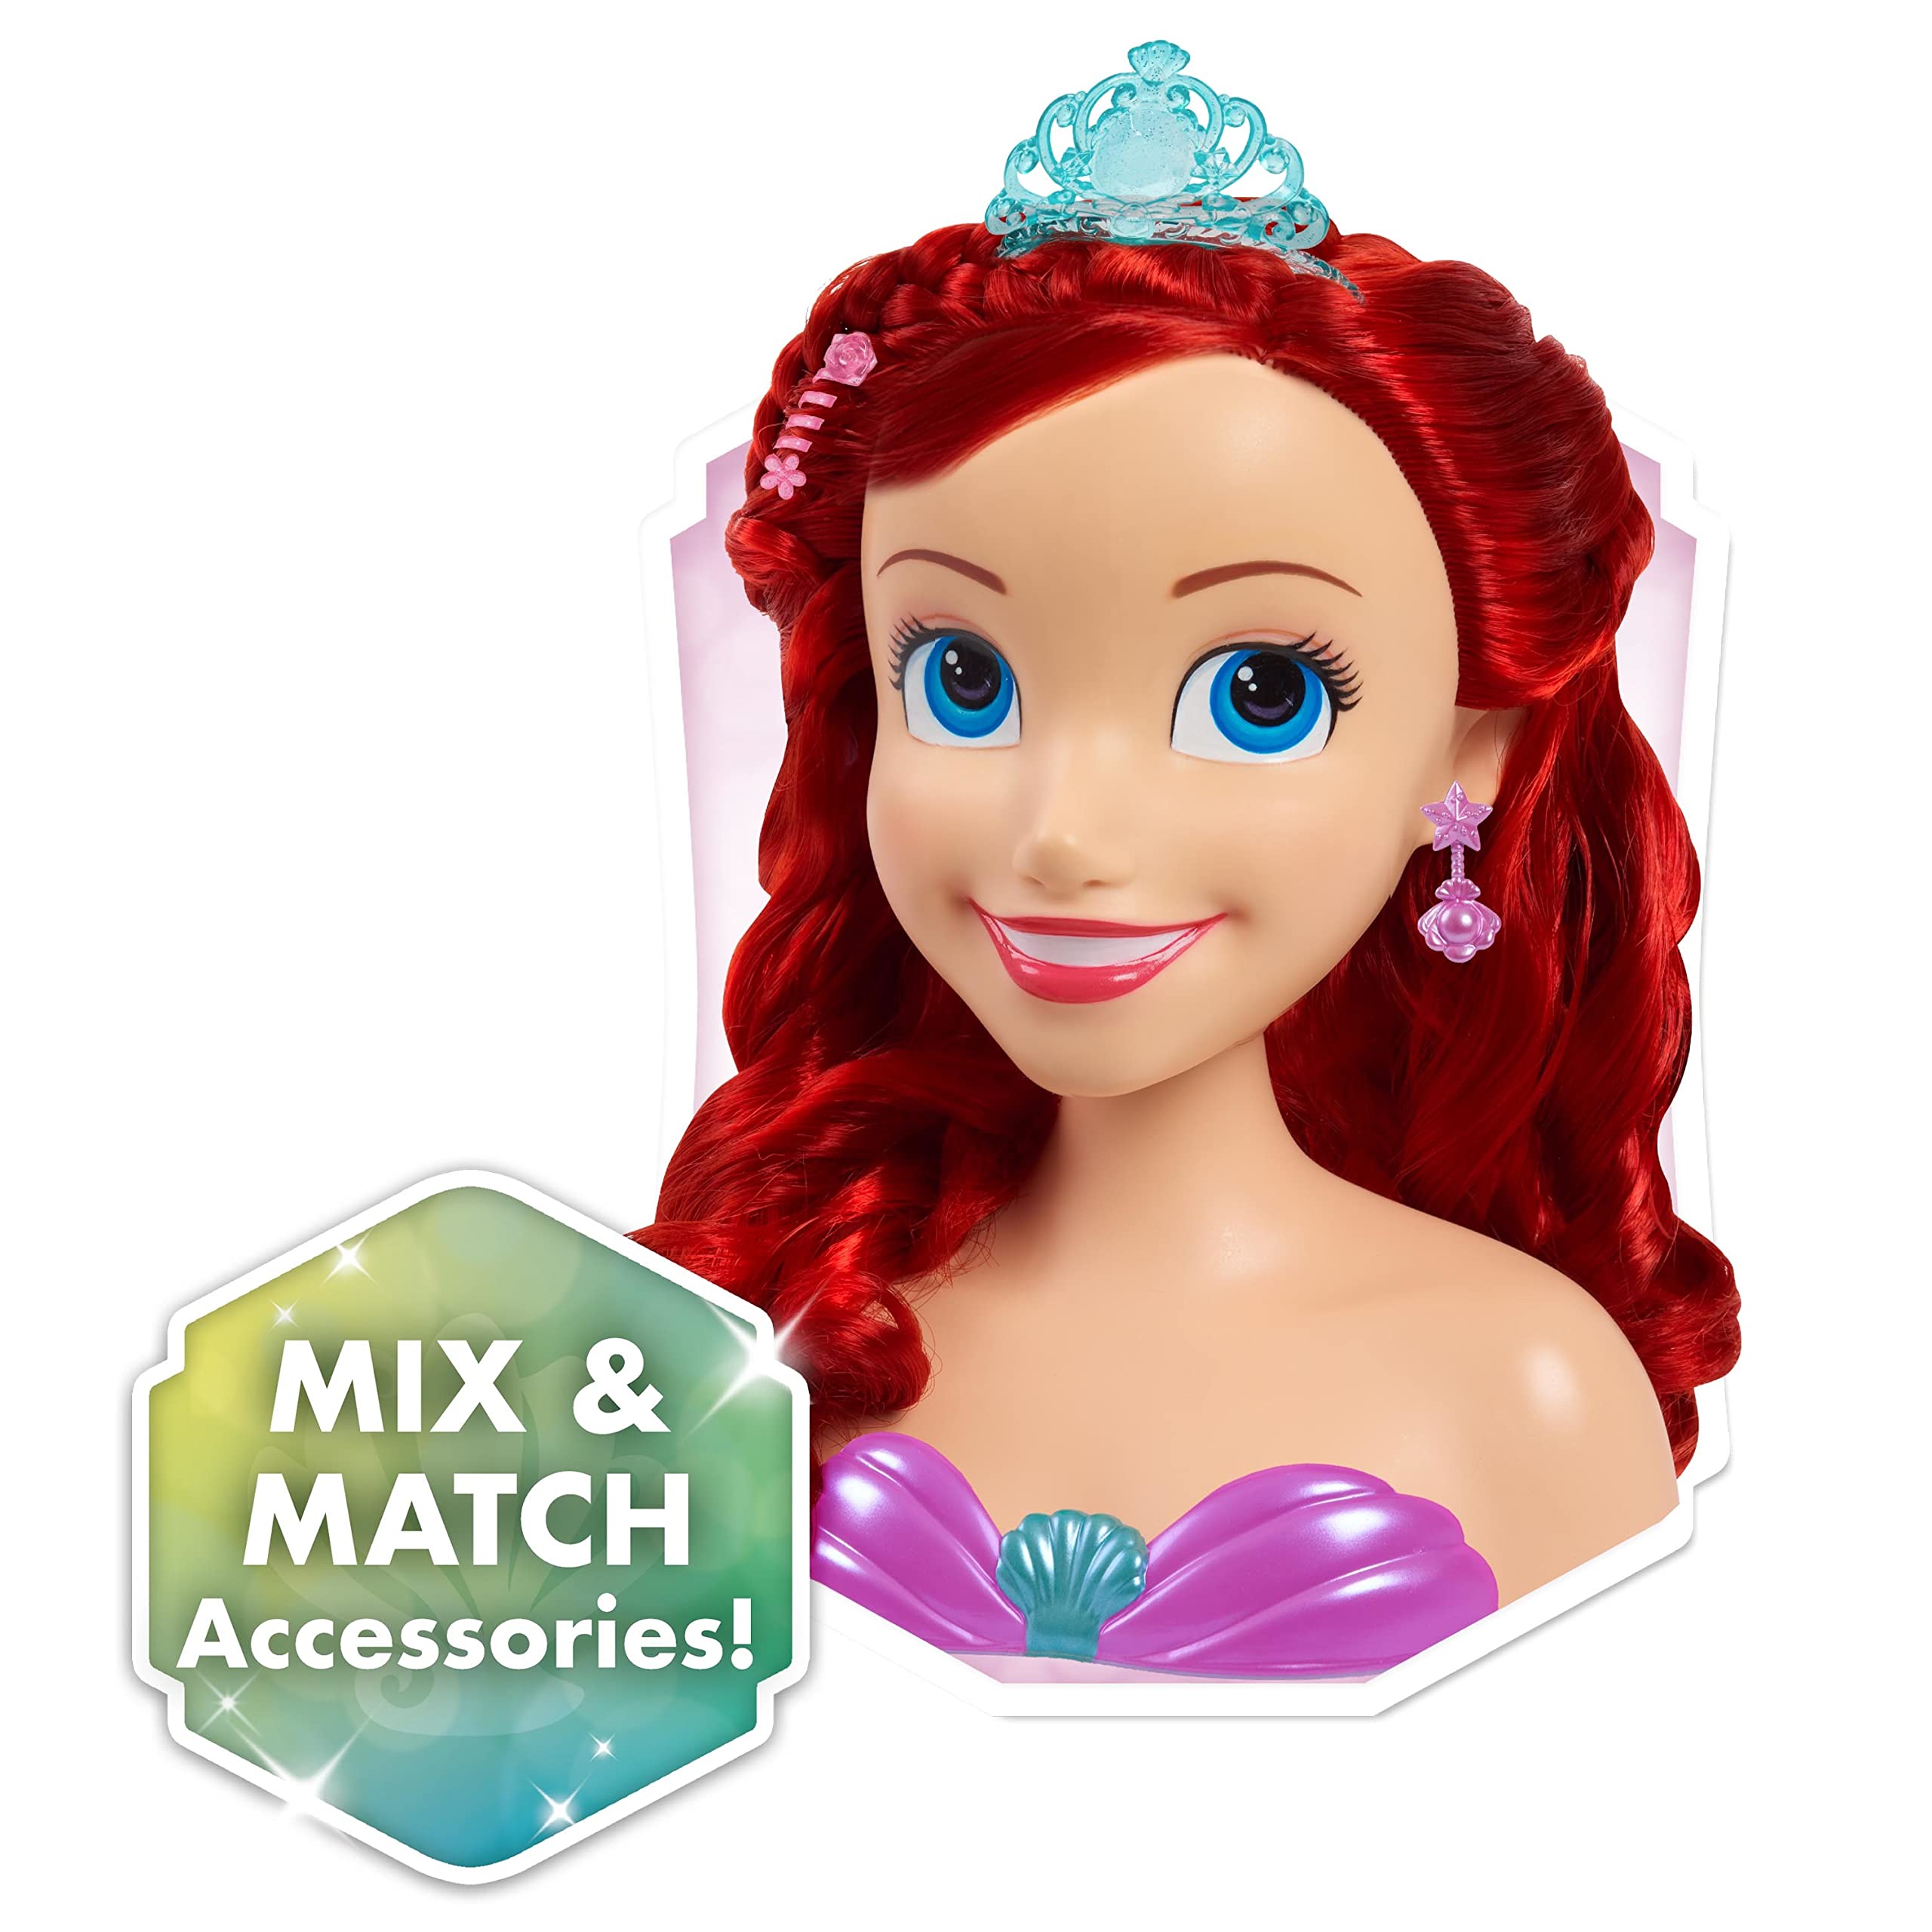 Disney Princess Ariel Styling Head, 18-pieces, Pretend Play, Officially Licensed Kids Toys for Ages 3 Up, Gifts and Presents by Just Play